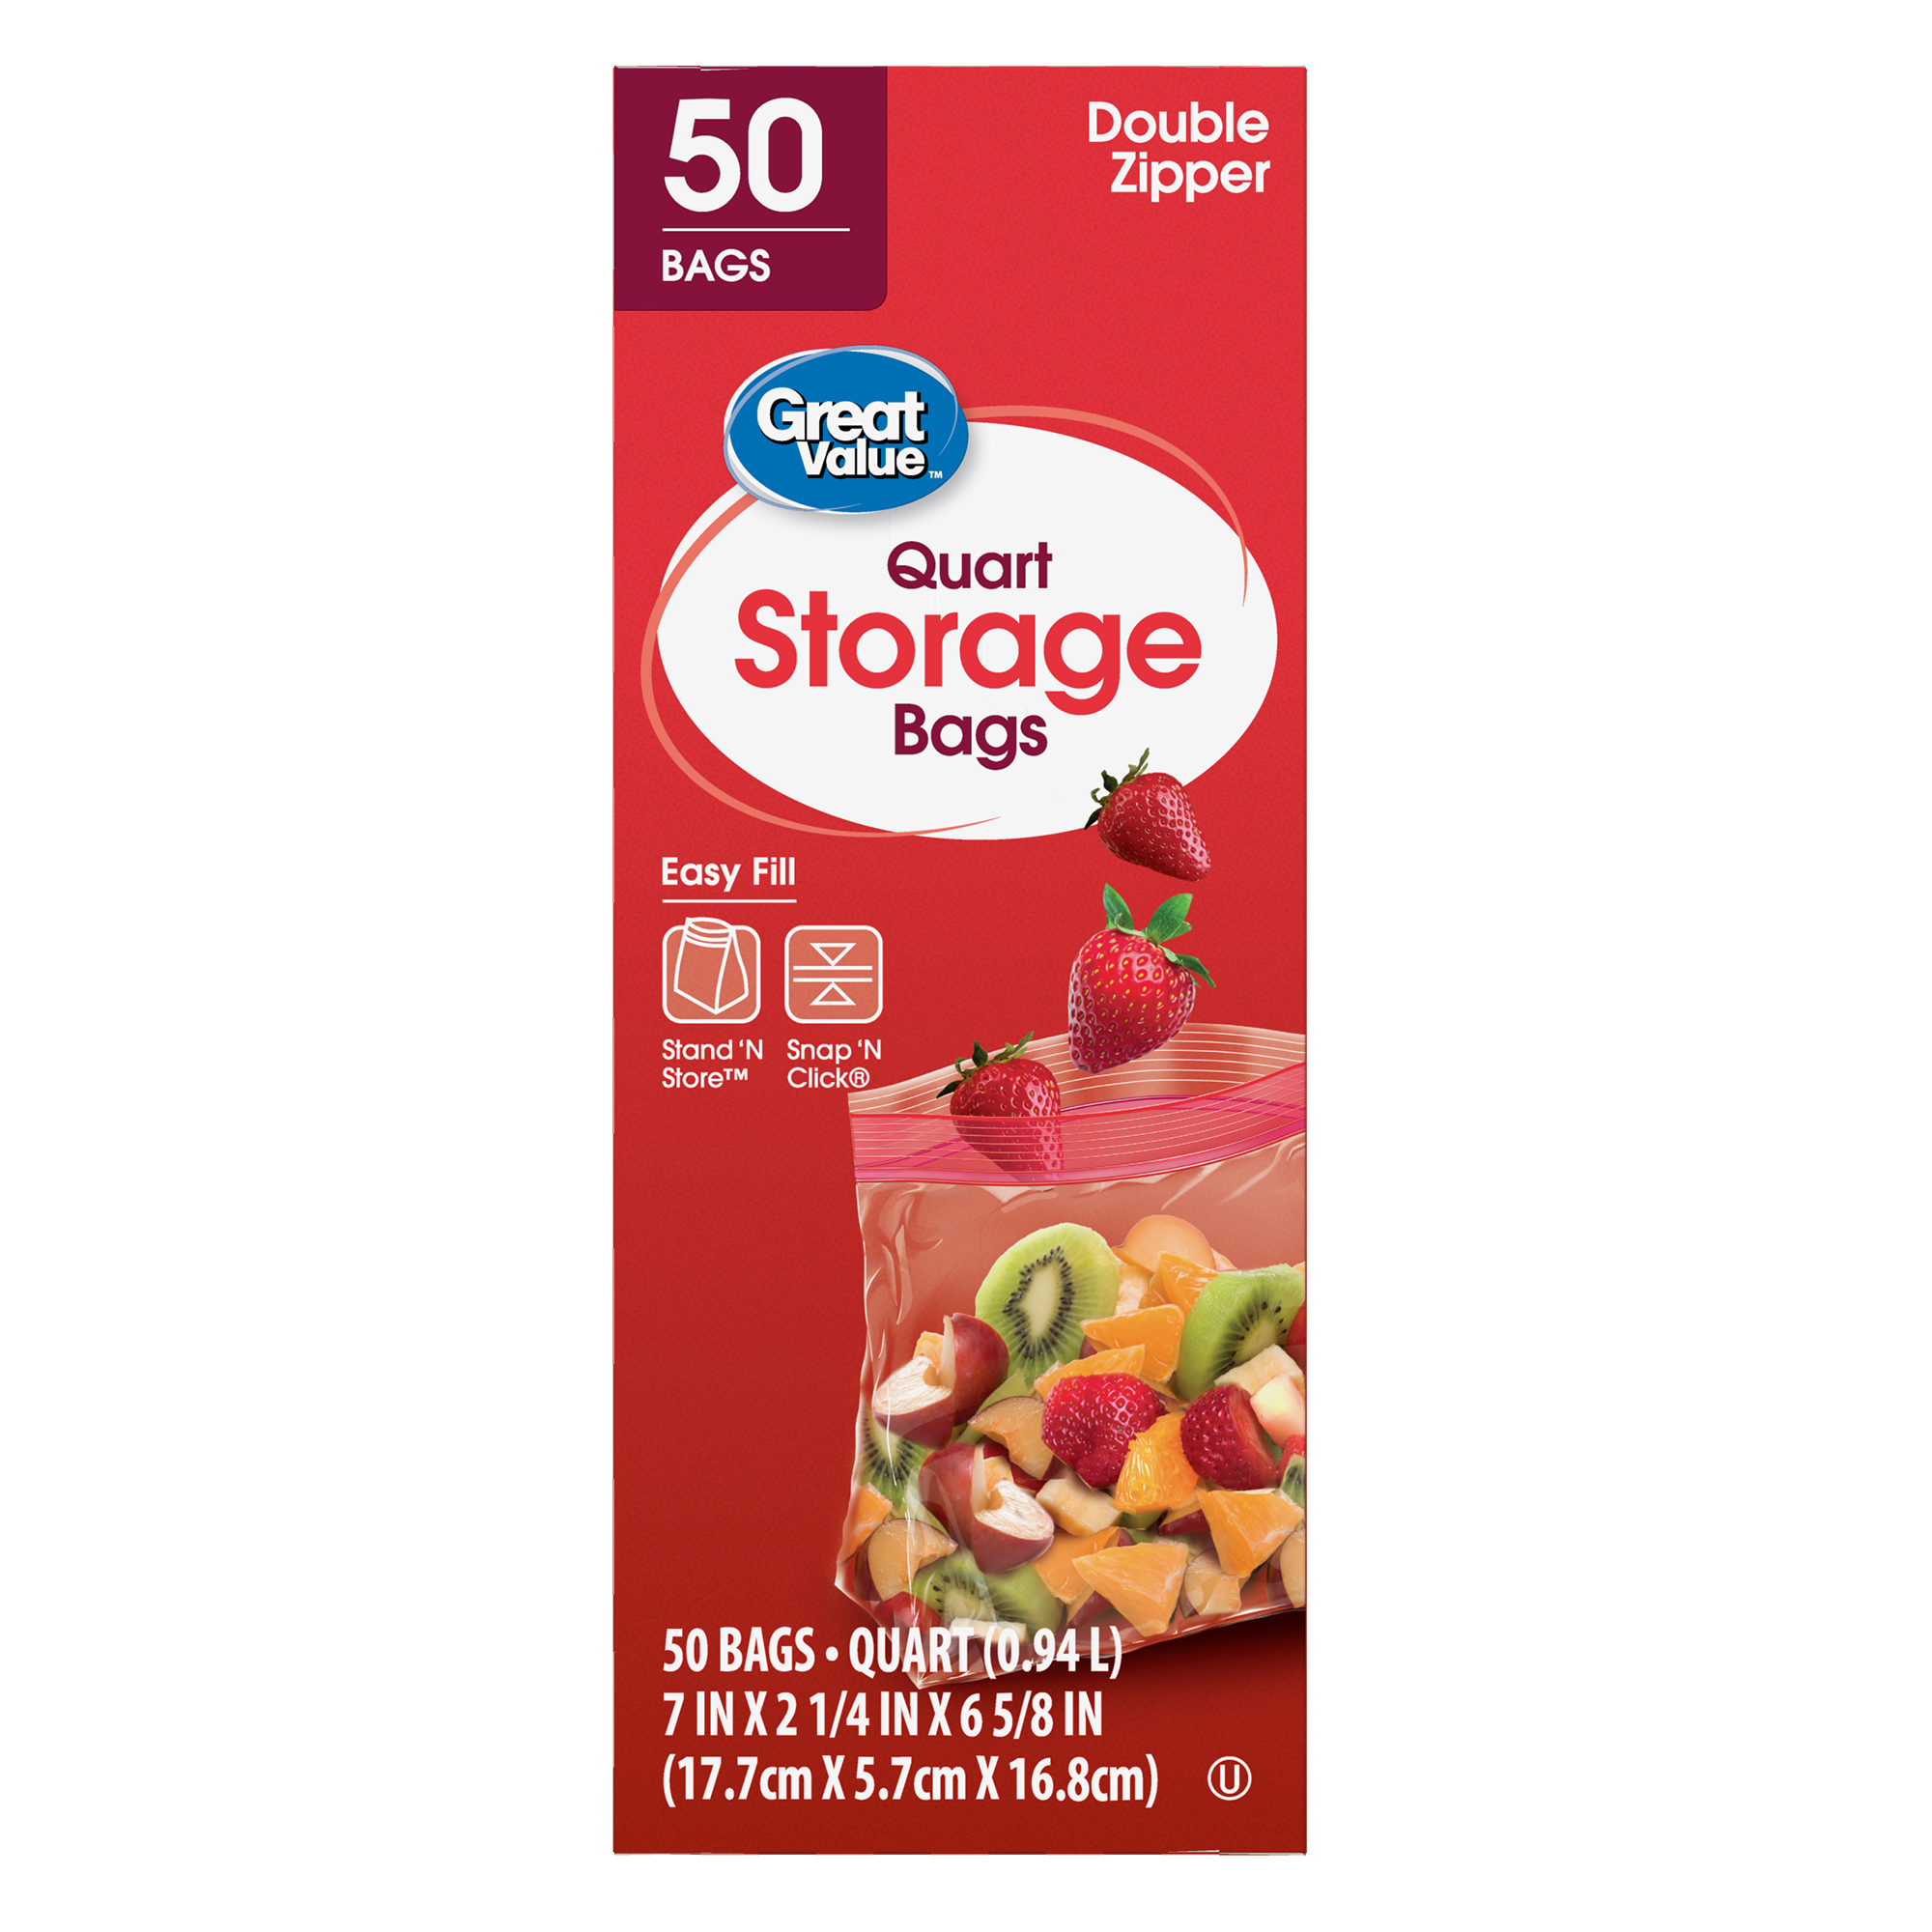 Great Value Fresh Seal Quart Storage Double Zipper Bags, 50 Count - image 1 of 9